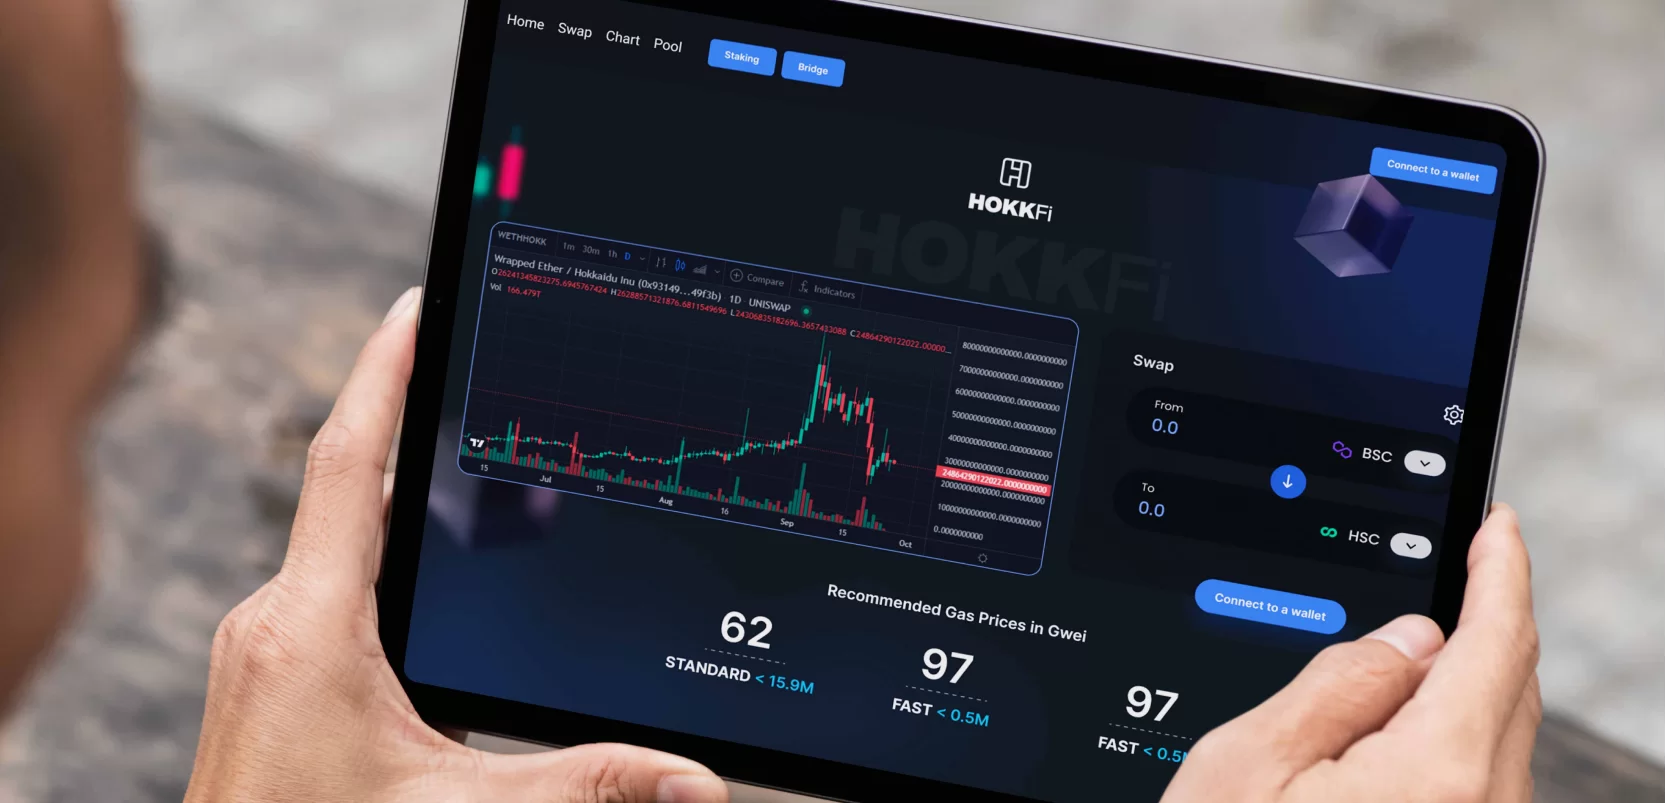 hokkfi client for blockchain development services by ropstam solutions